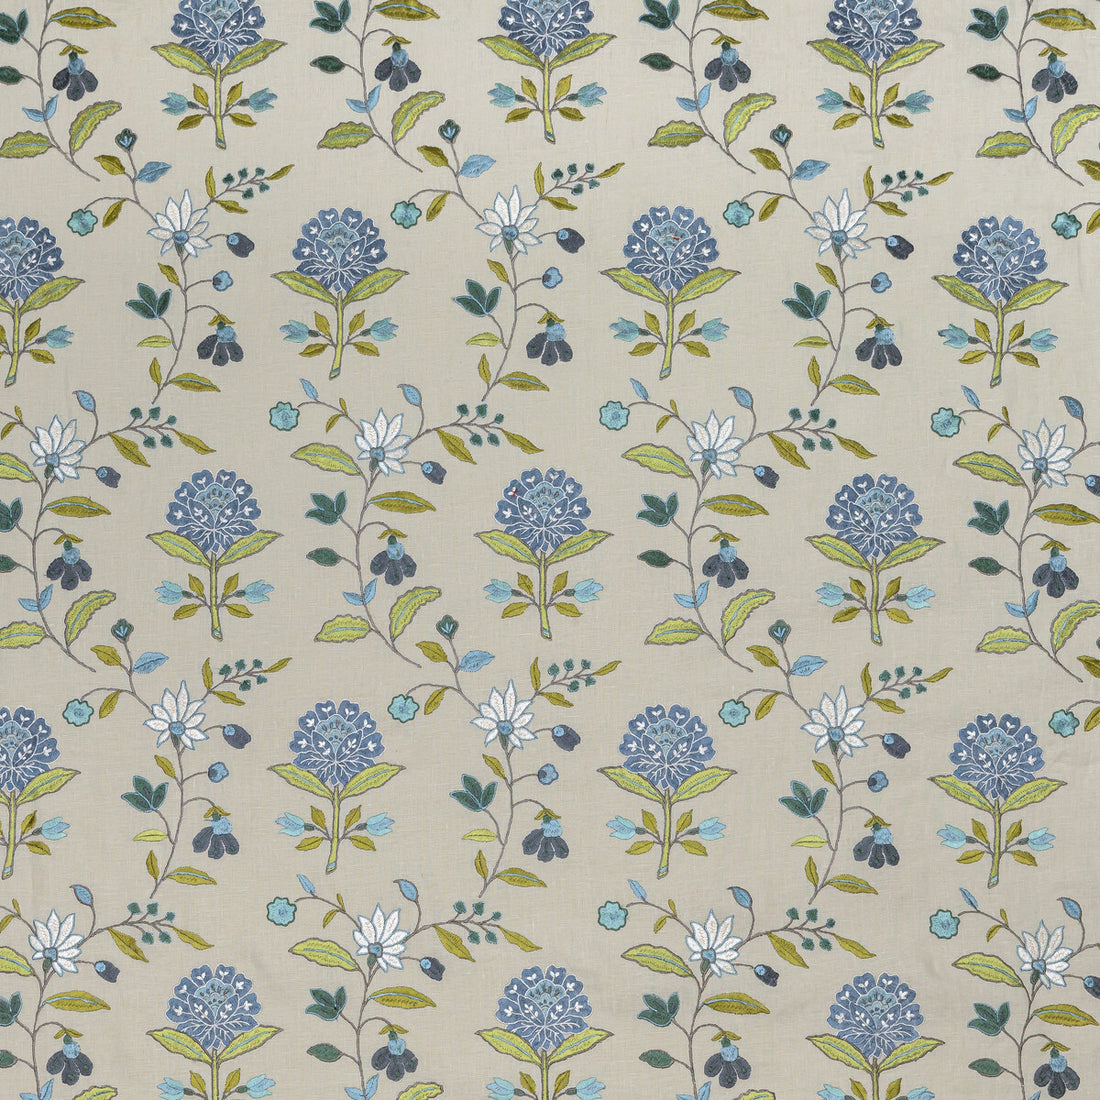 Kalla fabric in blue/green color - pattern BFC-3693.523.0 - by Lee Jofa in the Blithfield collection